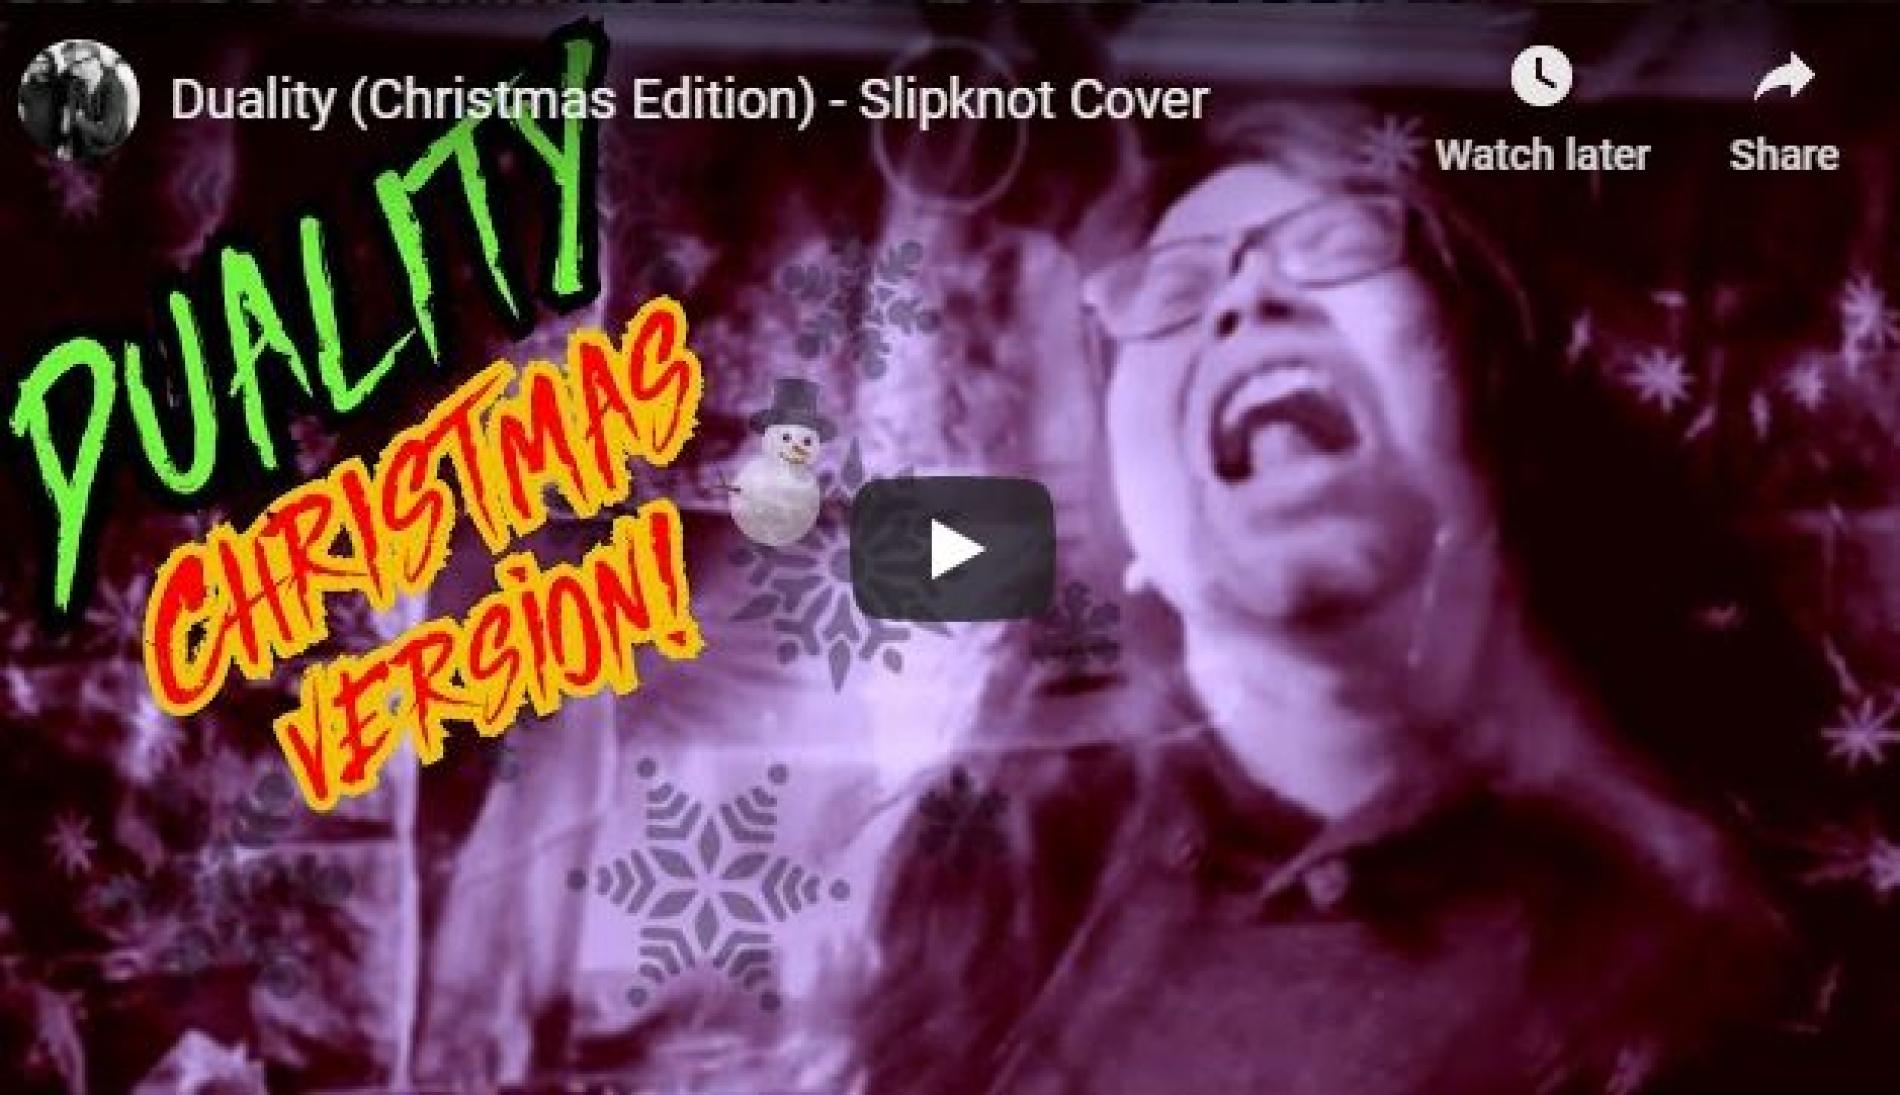 New Music : Far From Refuge – Duality (Christmas Edition) Slipknot Cover